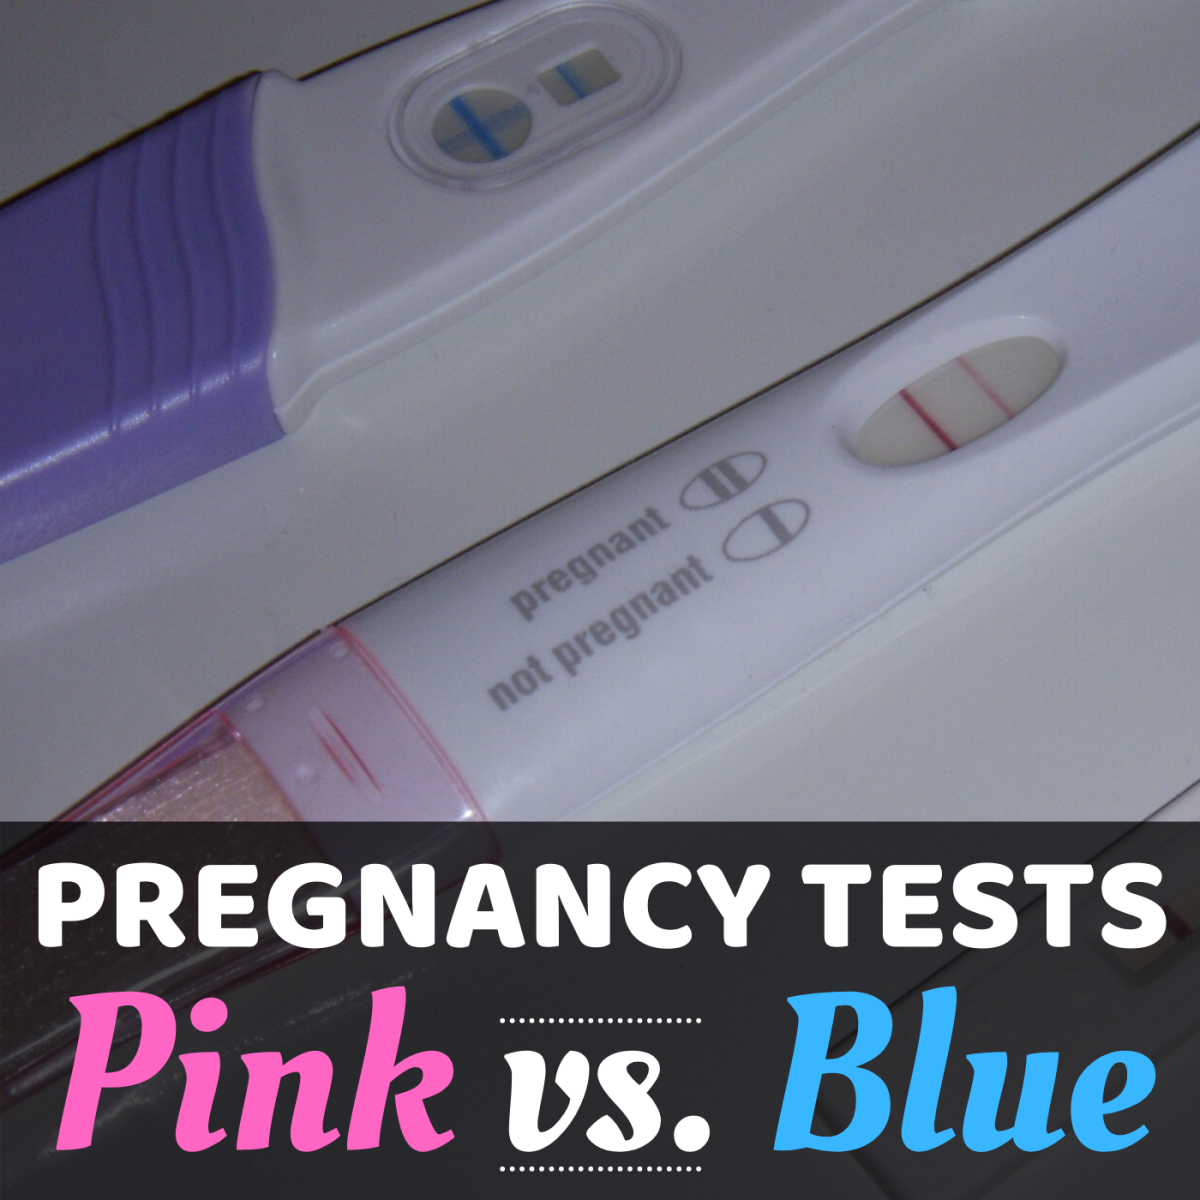 Whether you're trying to conceive or hoping you haven't, accuracy is crucial. Should you choose a test with pink dye or blue?